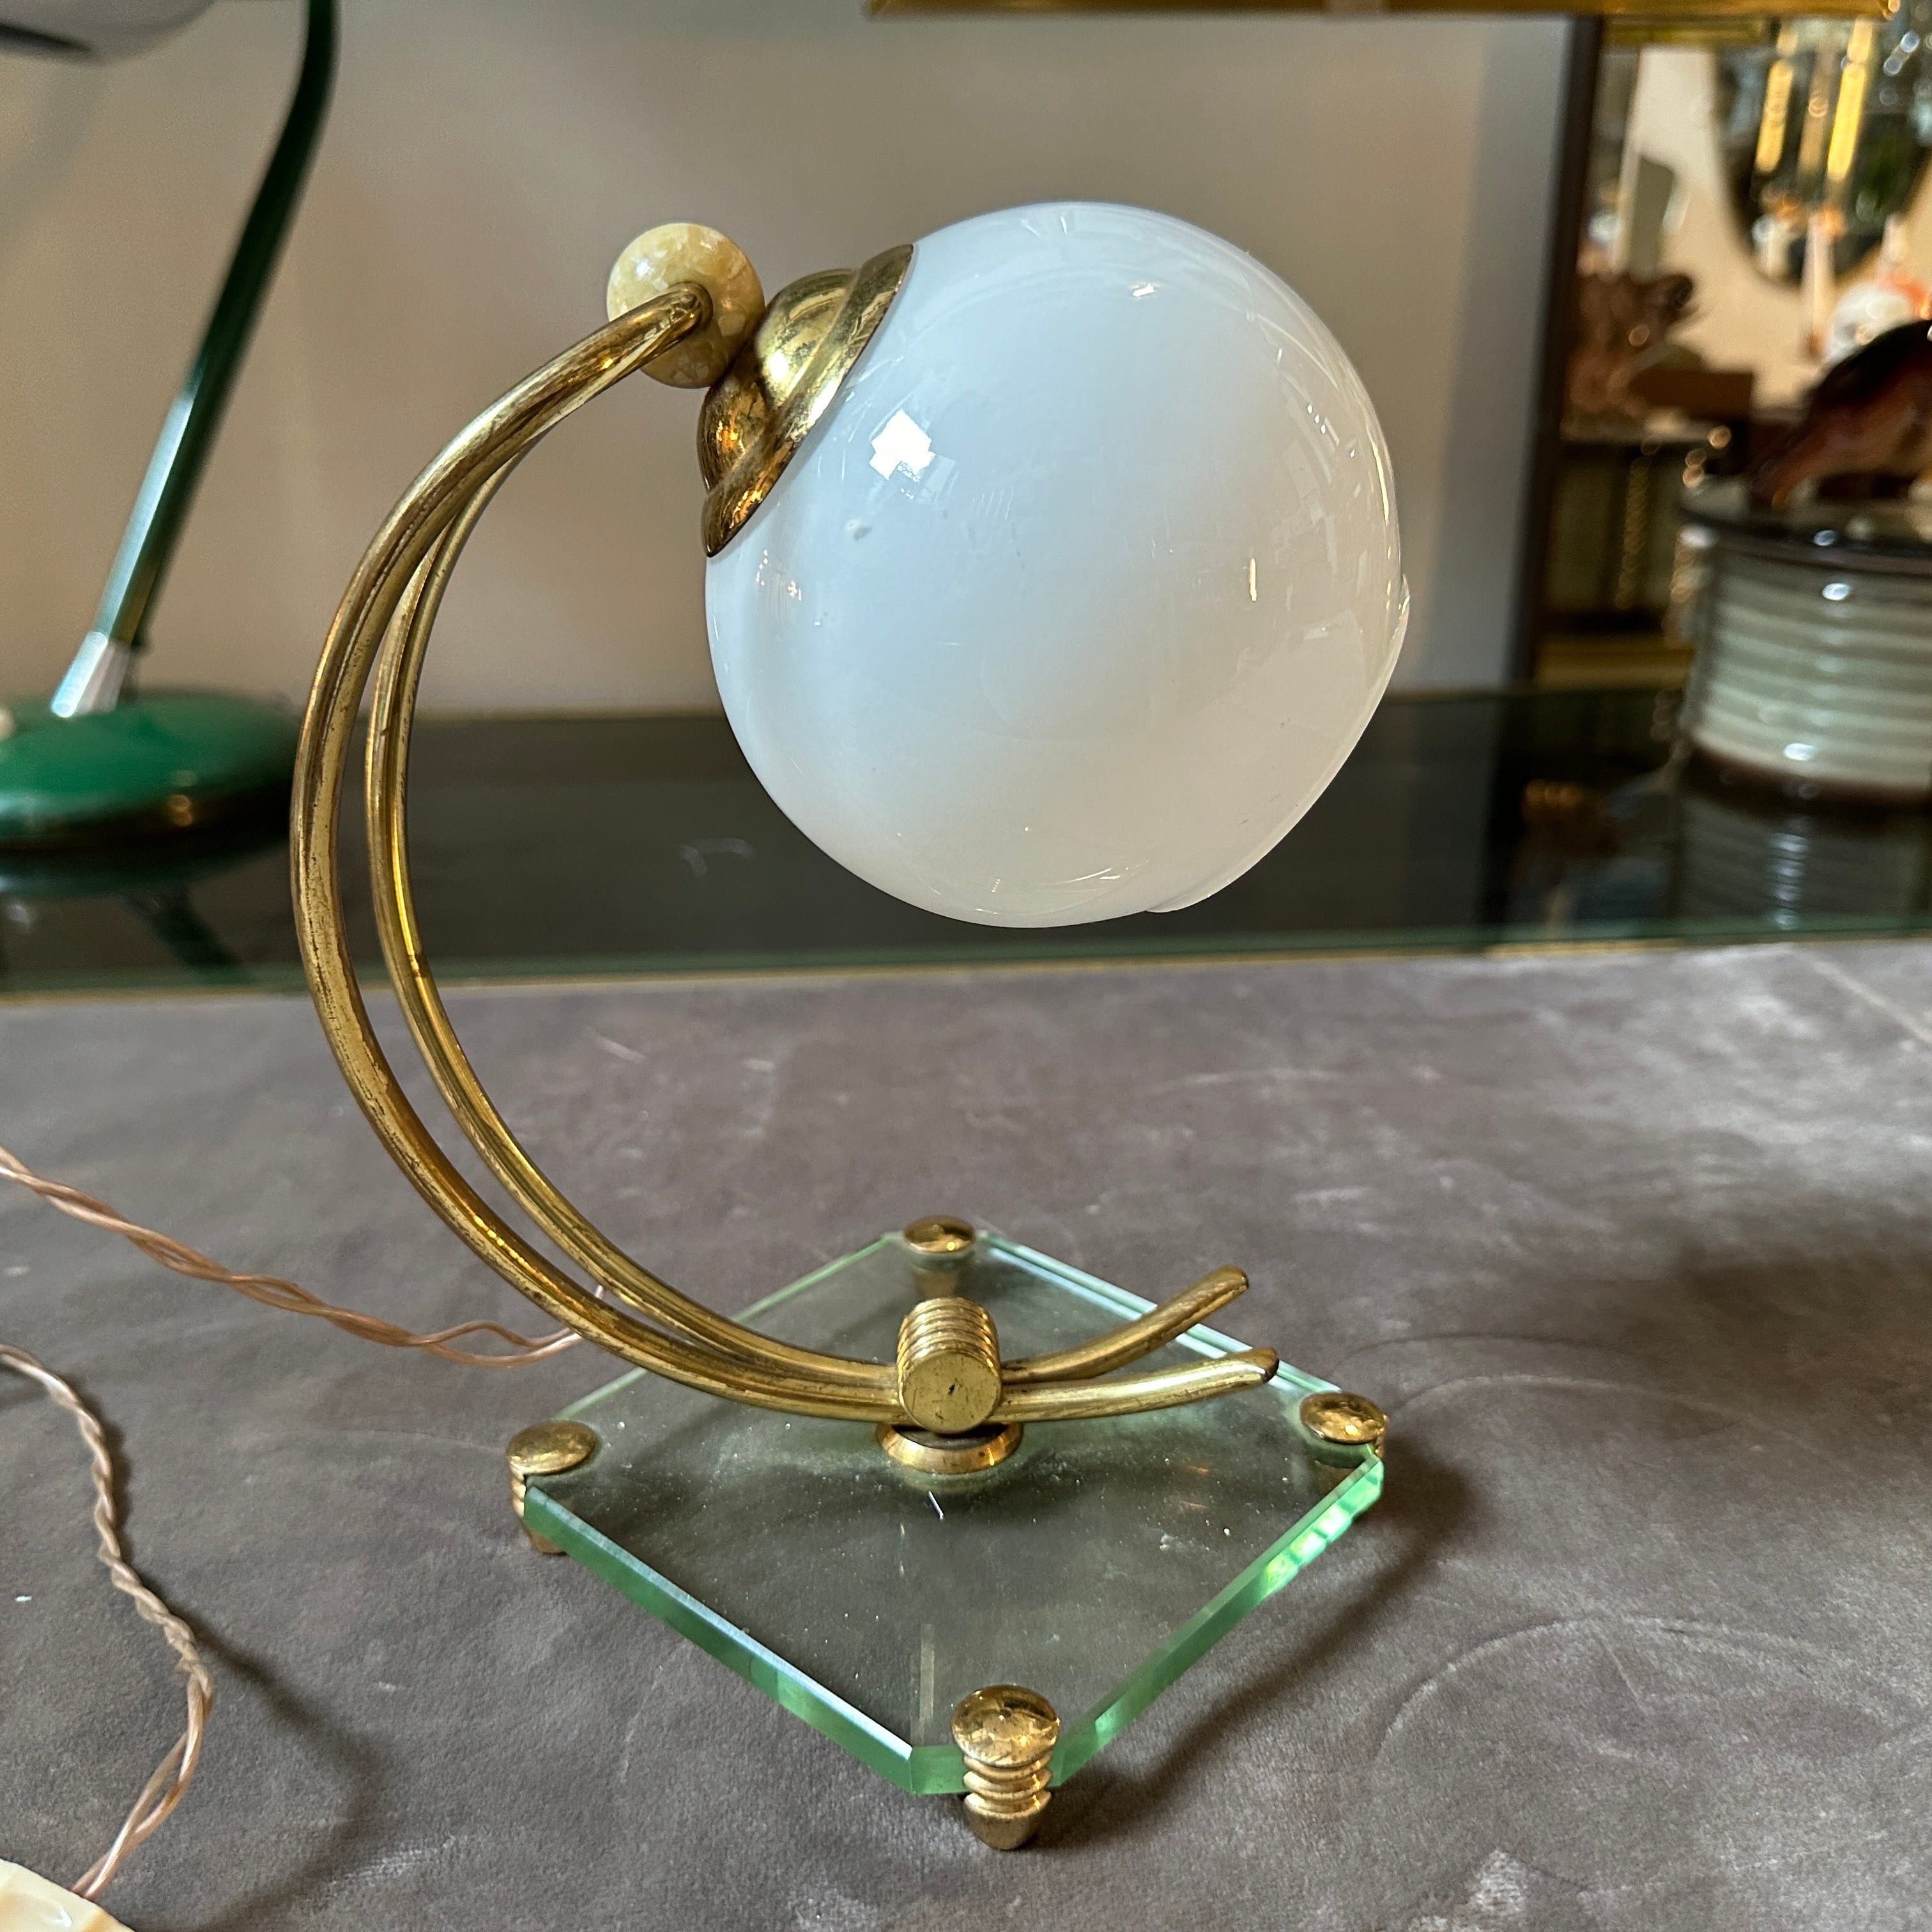 A lovely mid-century modern table lamp designed and manufactured in Italy in the Fifties in the manner of Fontana Arte. High quality Verde Nilo Glass and Brass are in perfect vintage condition, it's in working order with original electrical